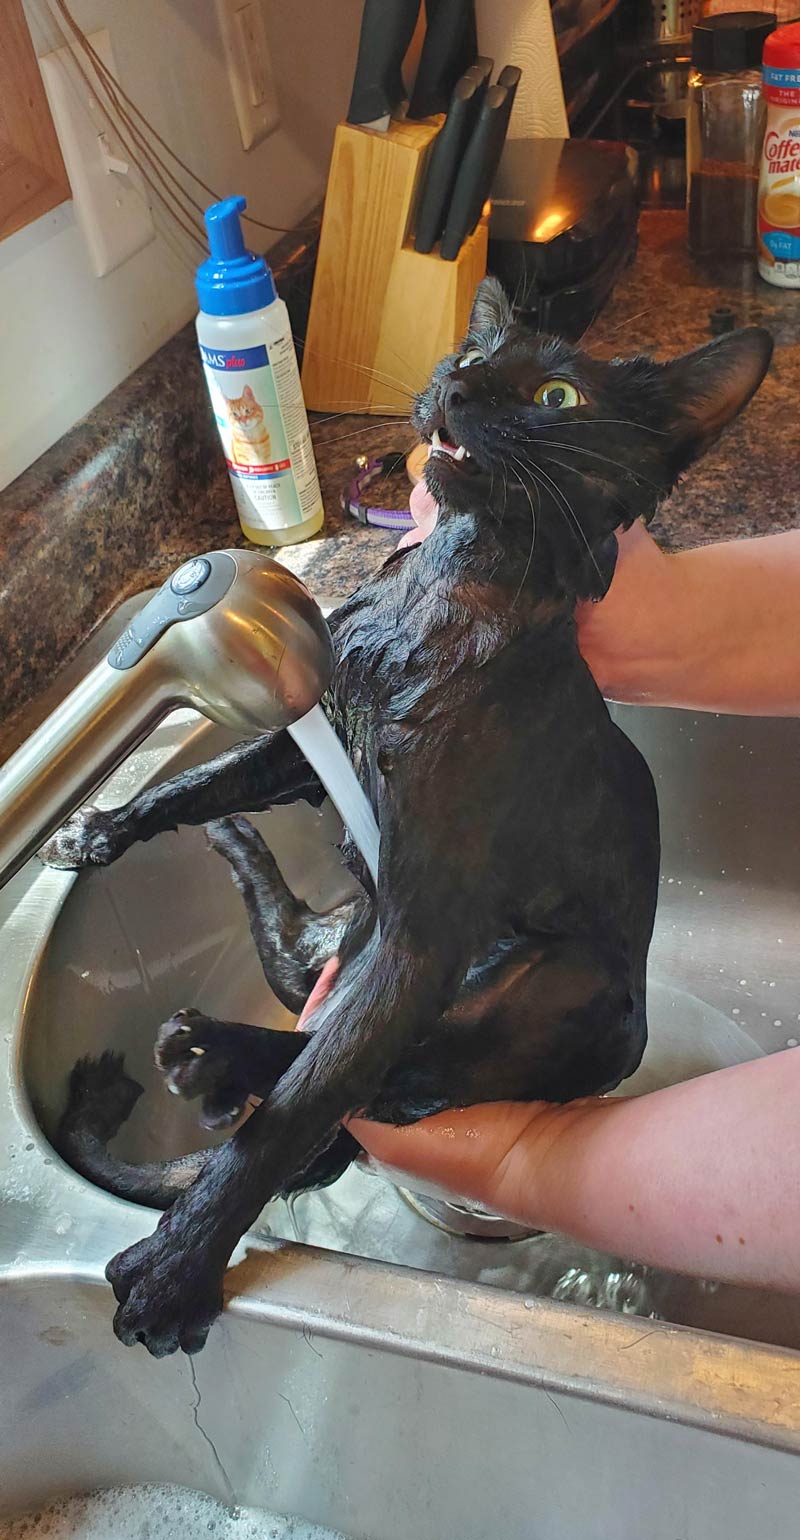 Gave our cat a bath this morning and I think she has had better days...